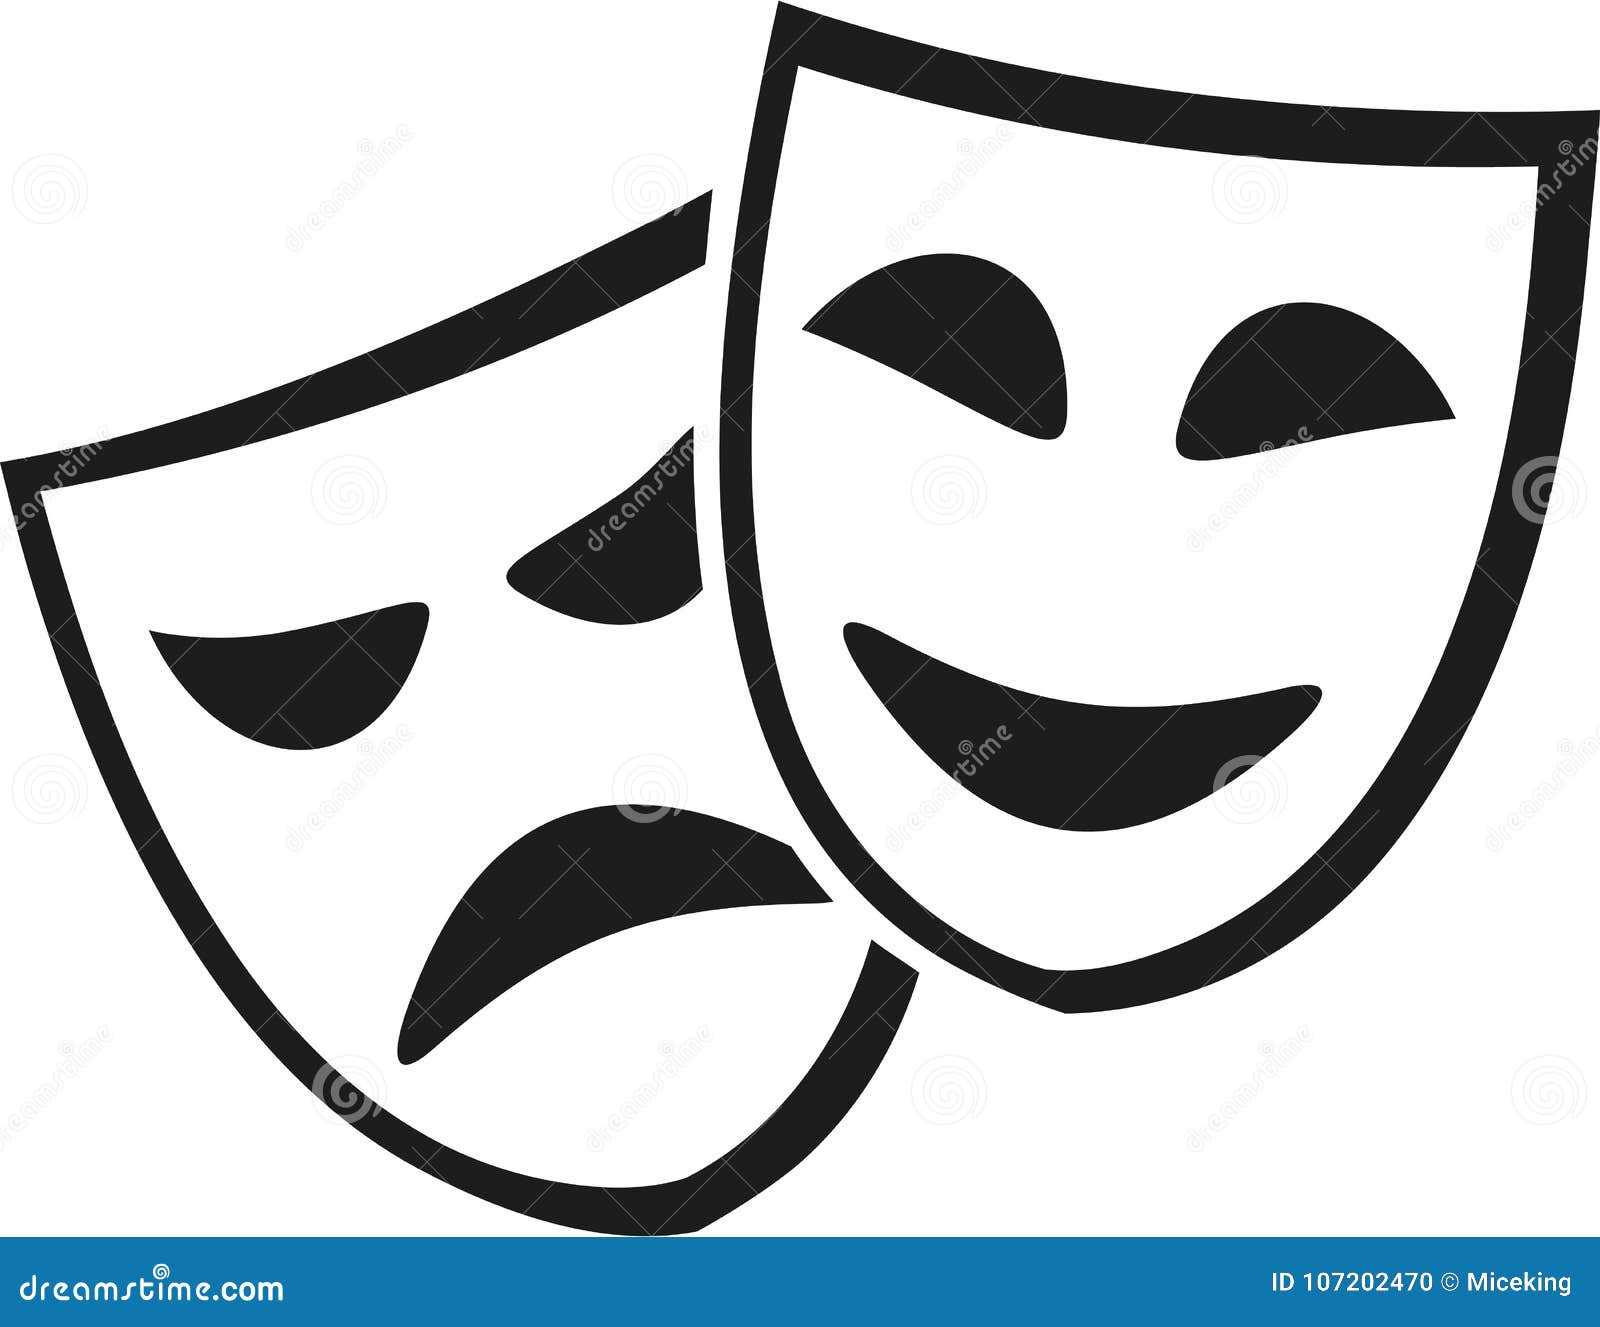 https://thumbs.dreamstime.com/z/theater-masks-icon-stage-vector-theater-masks-icon-107202470.jpg